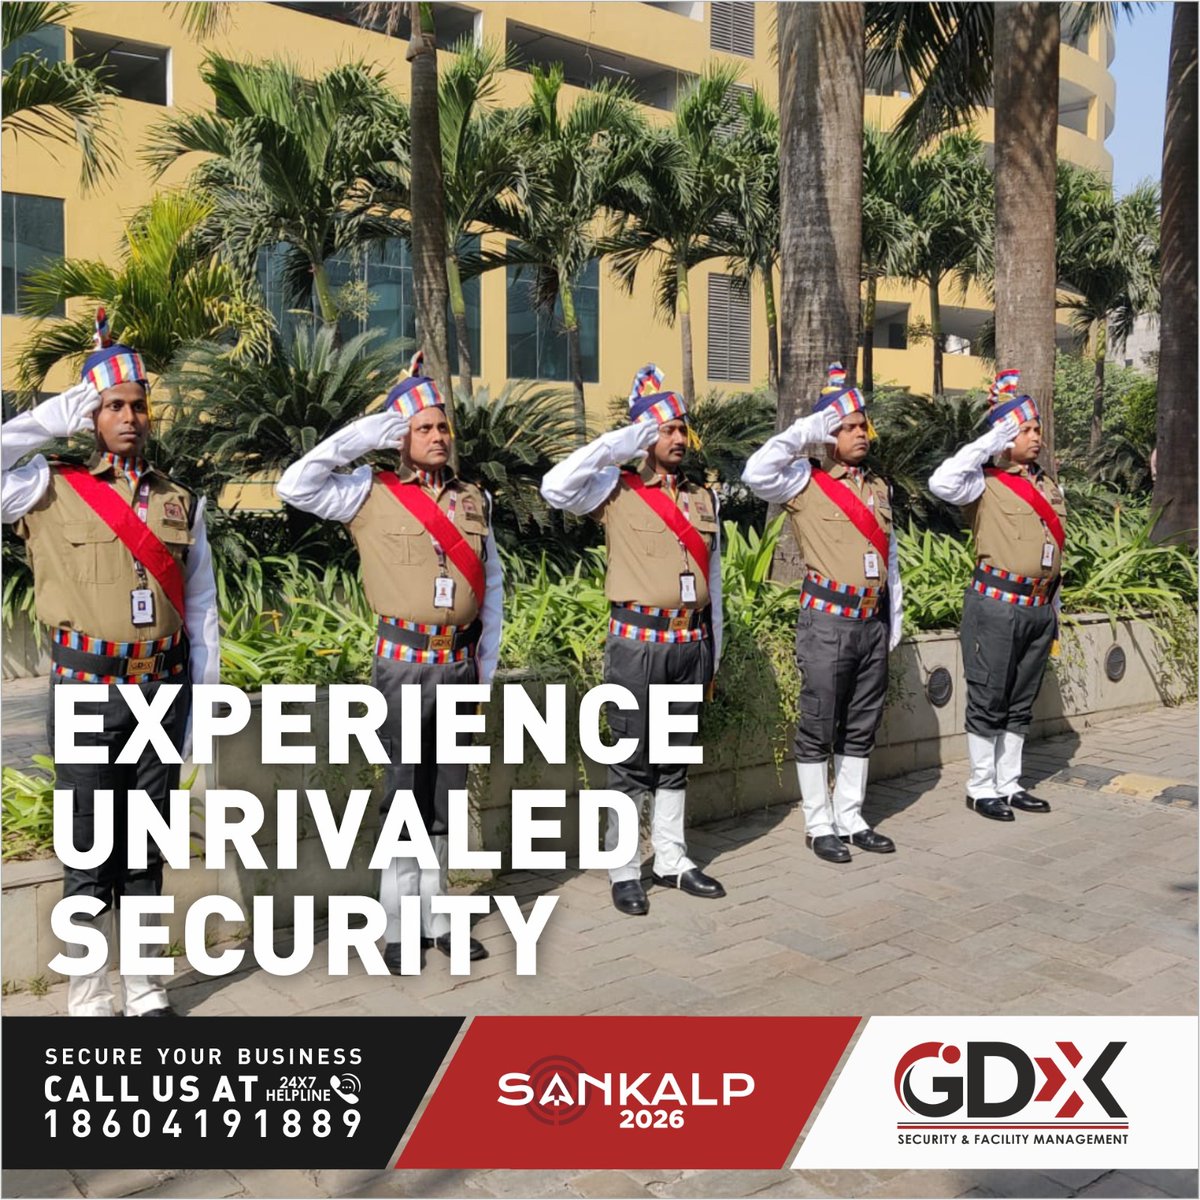 Security Solutions Tailored for Your Business
When security is non-negotiable for your business, trust the experts. Trust us!
Call us anytime at our 24x7 helpline: 18604191889
#BusinessSecurity #ContinuousTraining #24x7Support #Training
 #Sankalp2026 
#www.gdxgroup.in